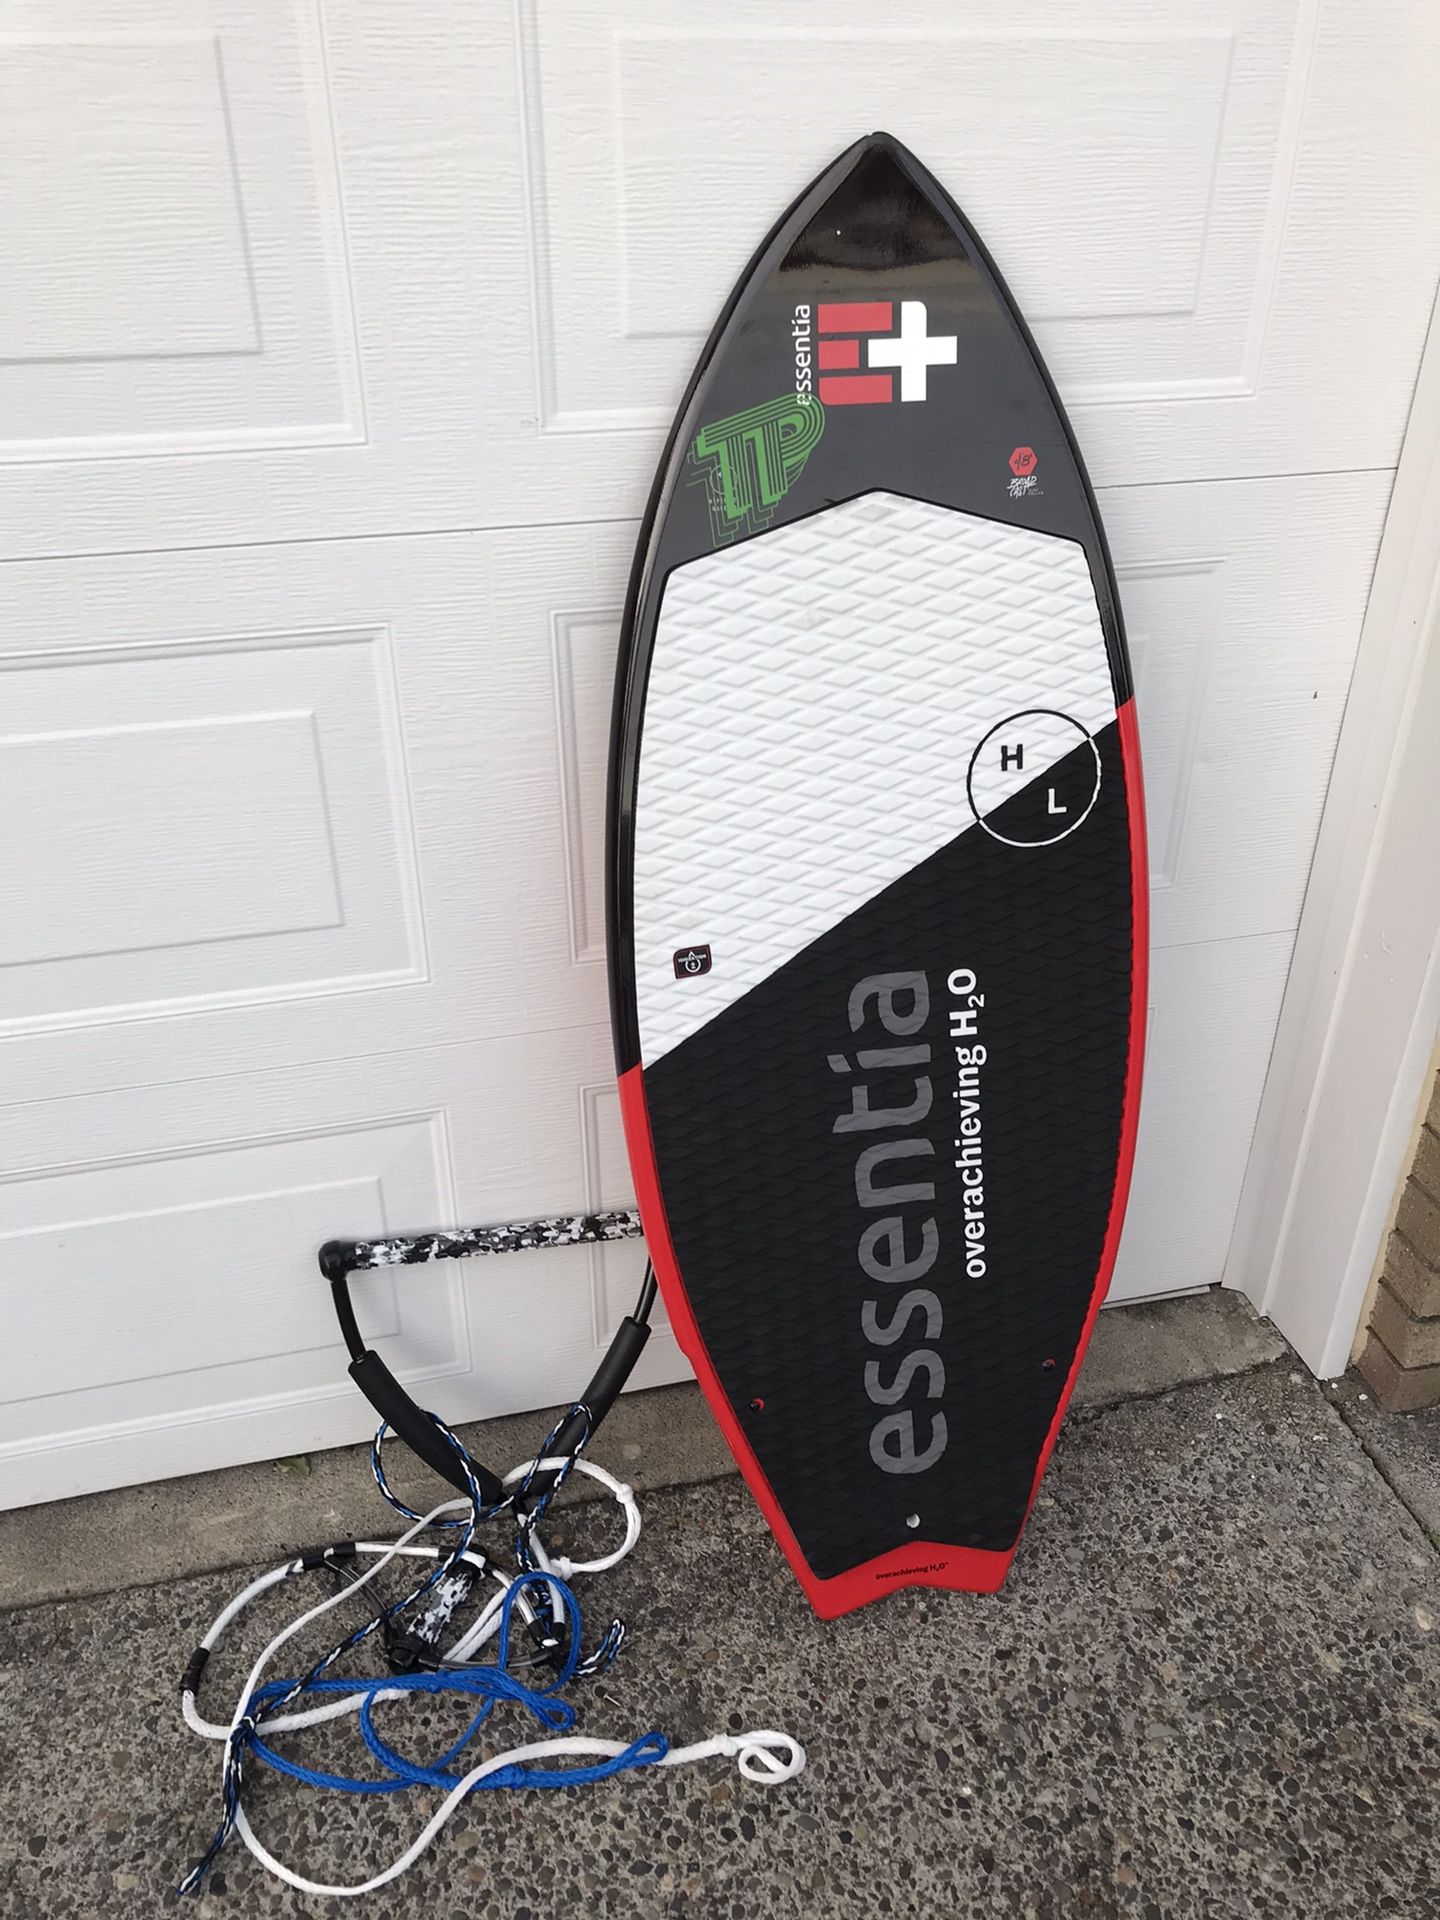 Wakeboard Hyper light 48” with tow rope